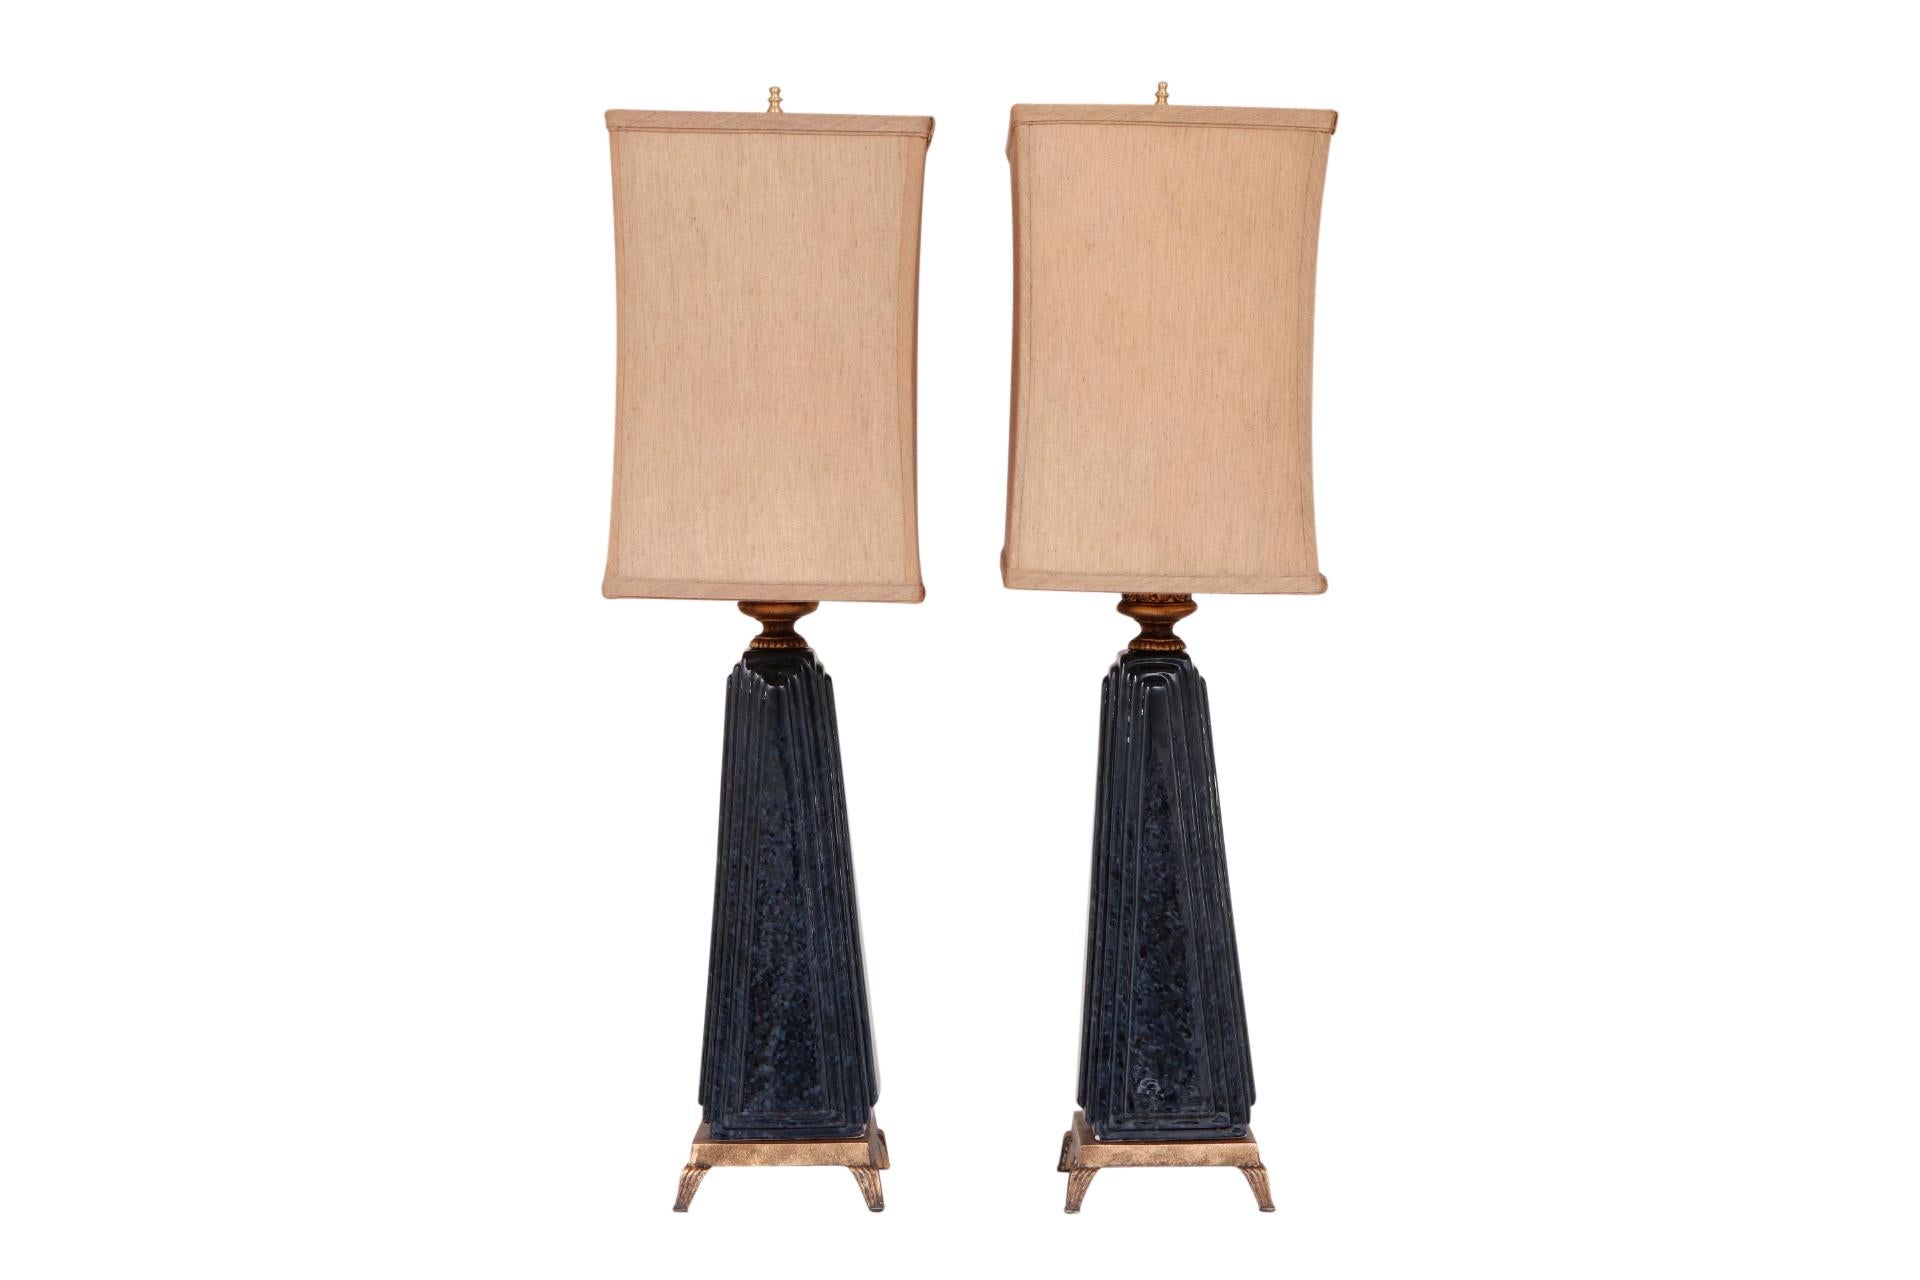 A pair of regency style ceramic table lamps. Lightly flecked navy columns taper upward and are squared with beveled edges. Sockets are decorated with outward flared acanthus leaves in brass. Square brass bases stand on reeded feet. Lamps come with